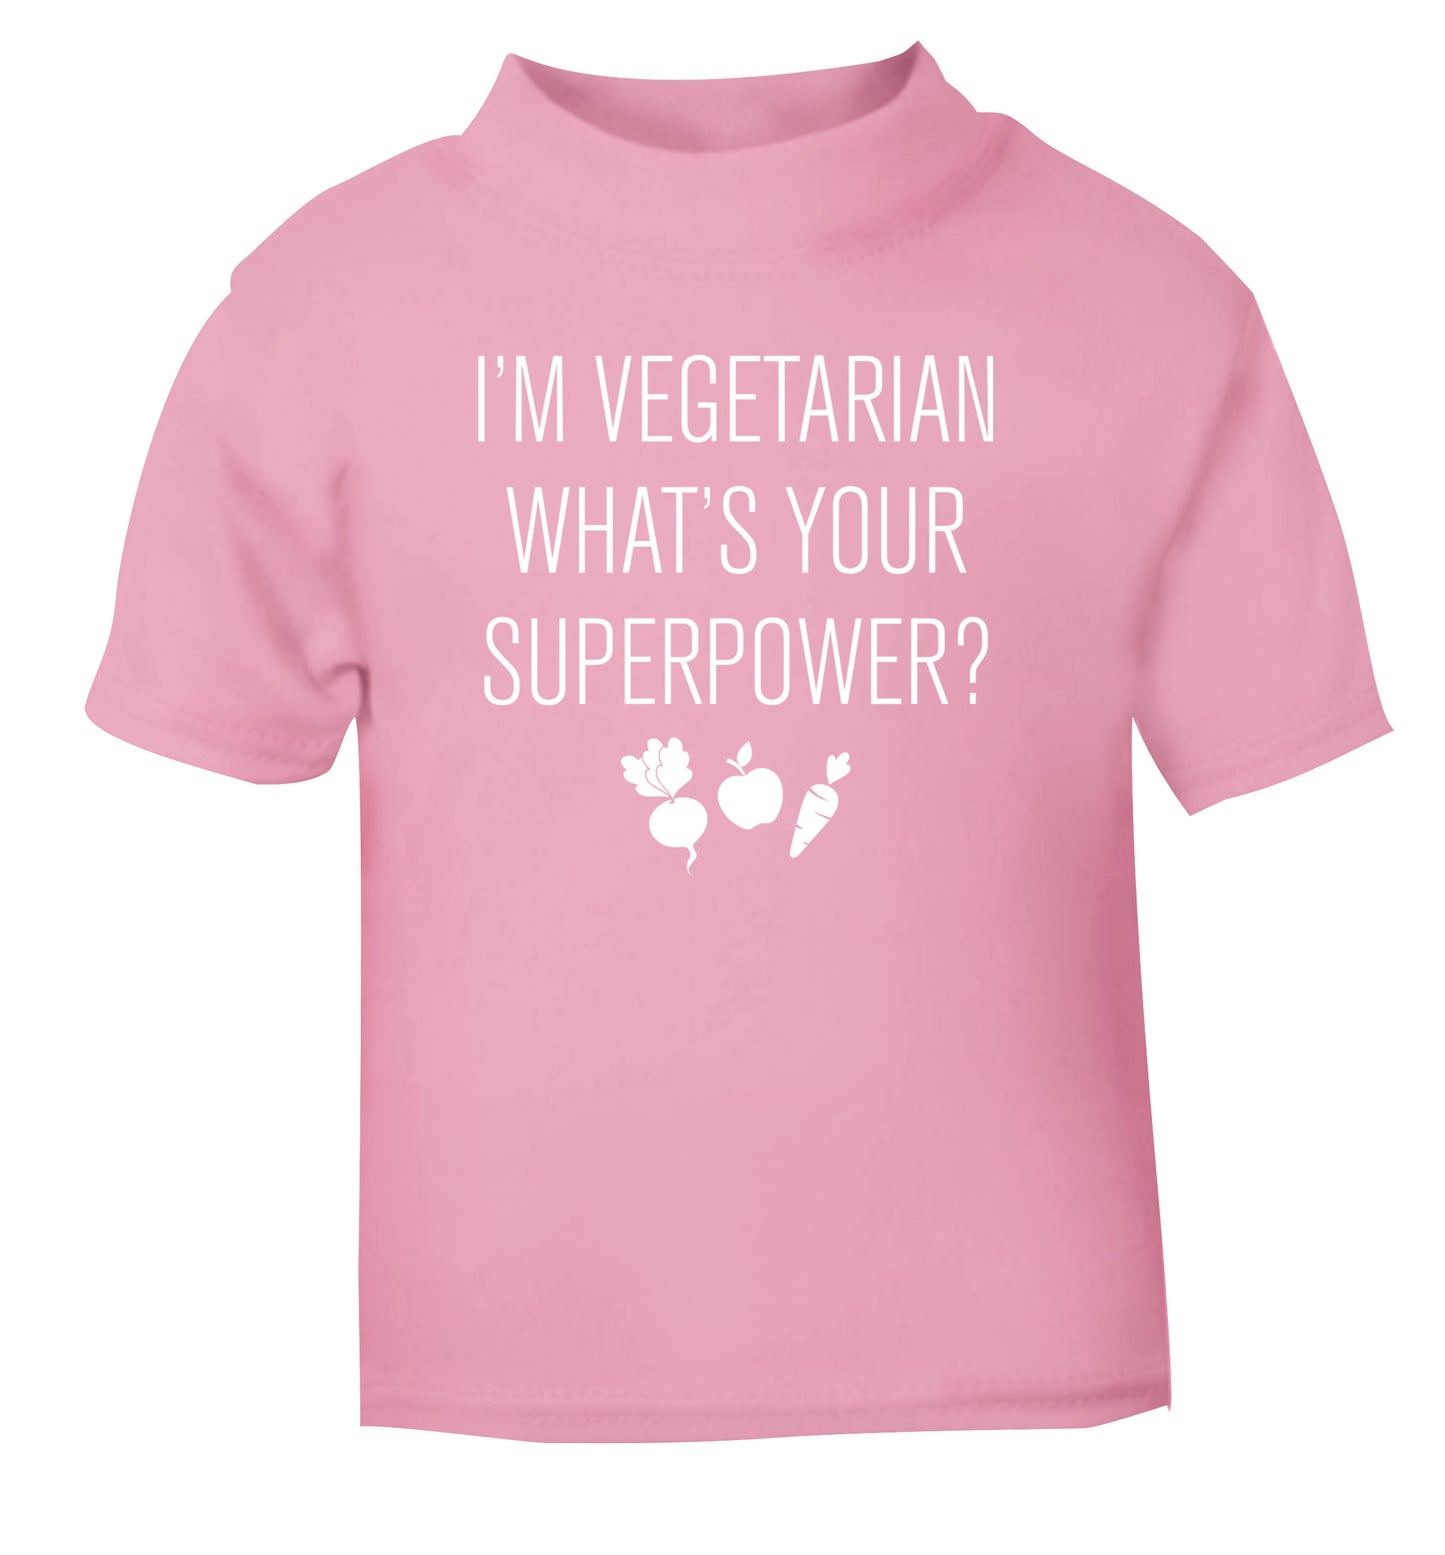 I'm vegetarian what's your superpower? light pink Baby Toddler Tshirt 2 Years